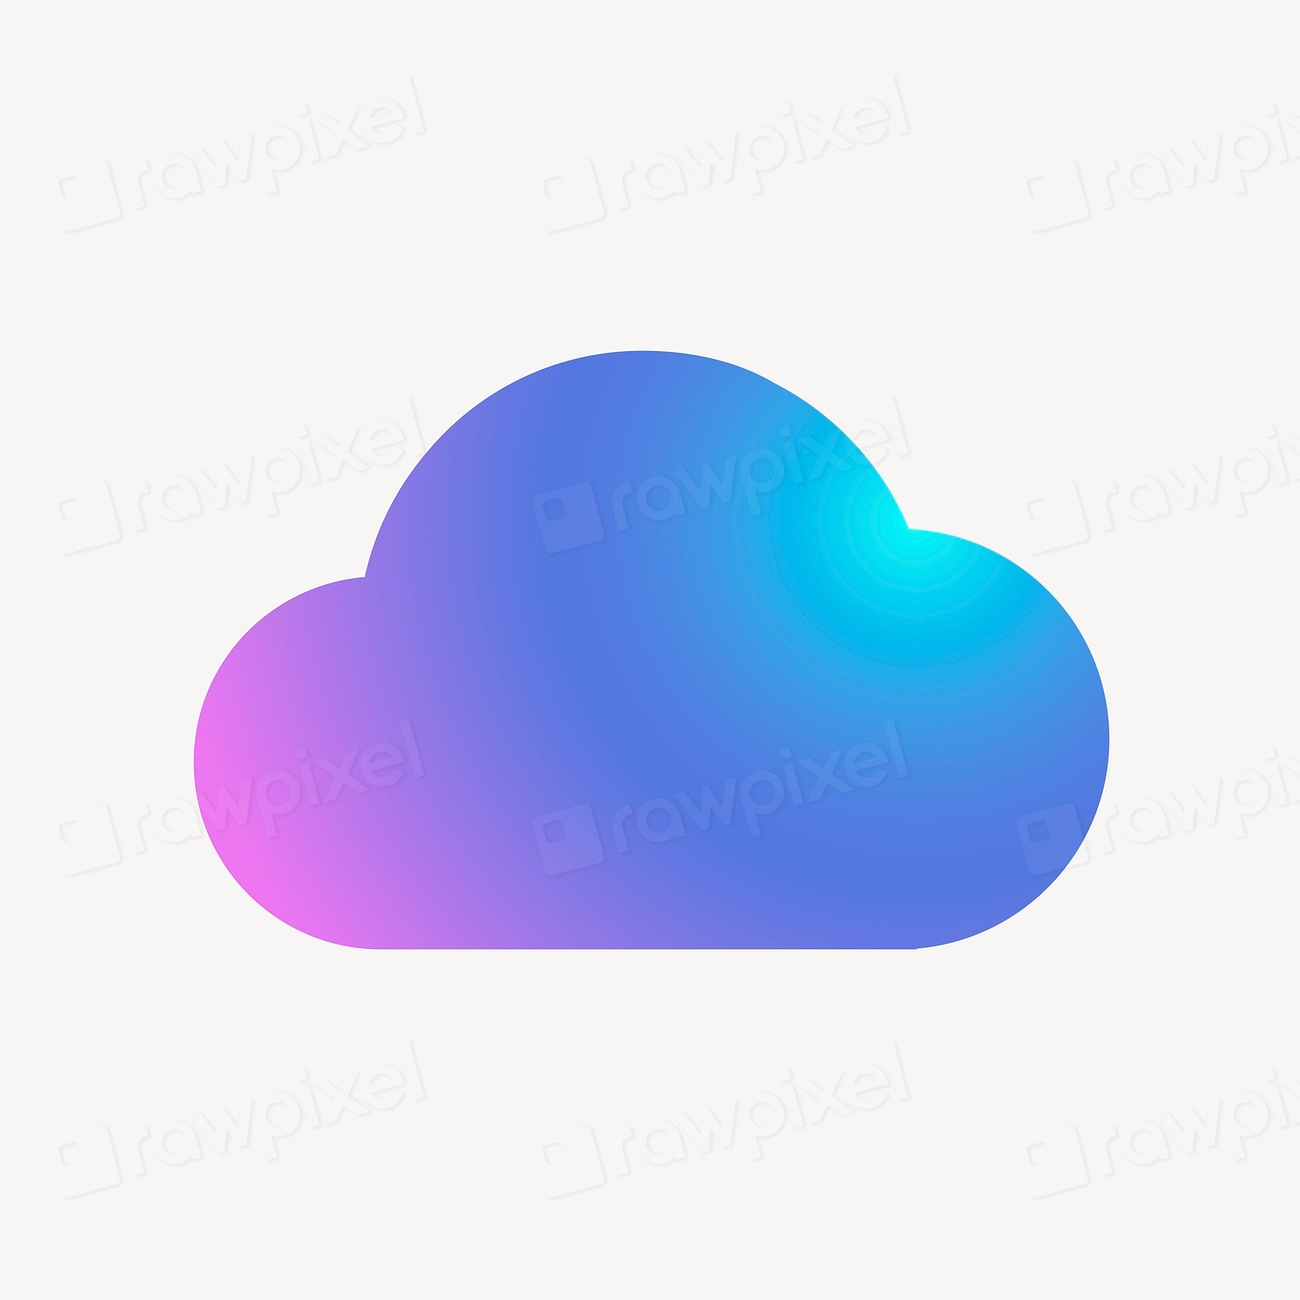 shortcuts icon aesthetic cloud